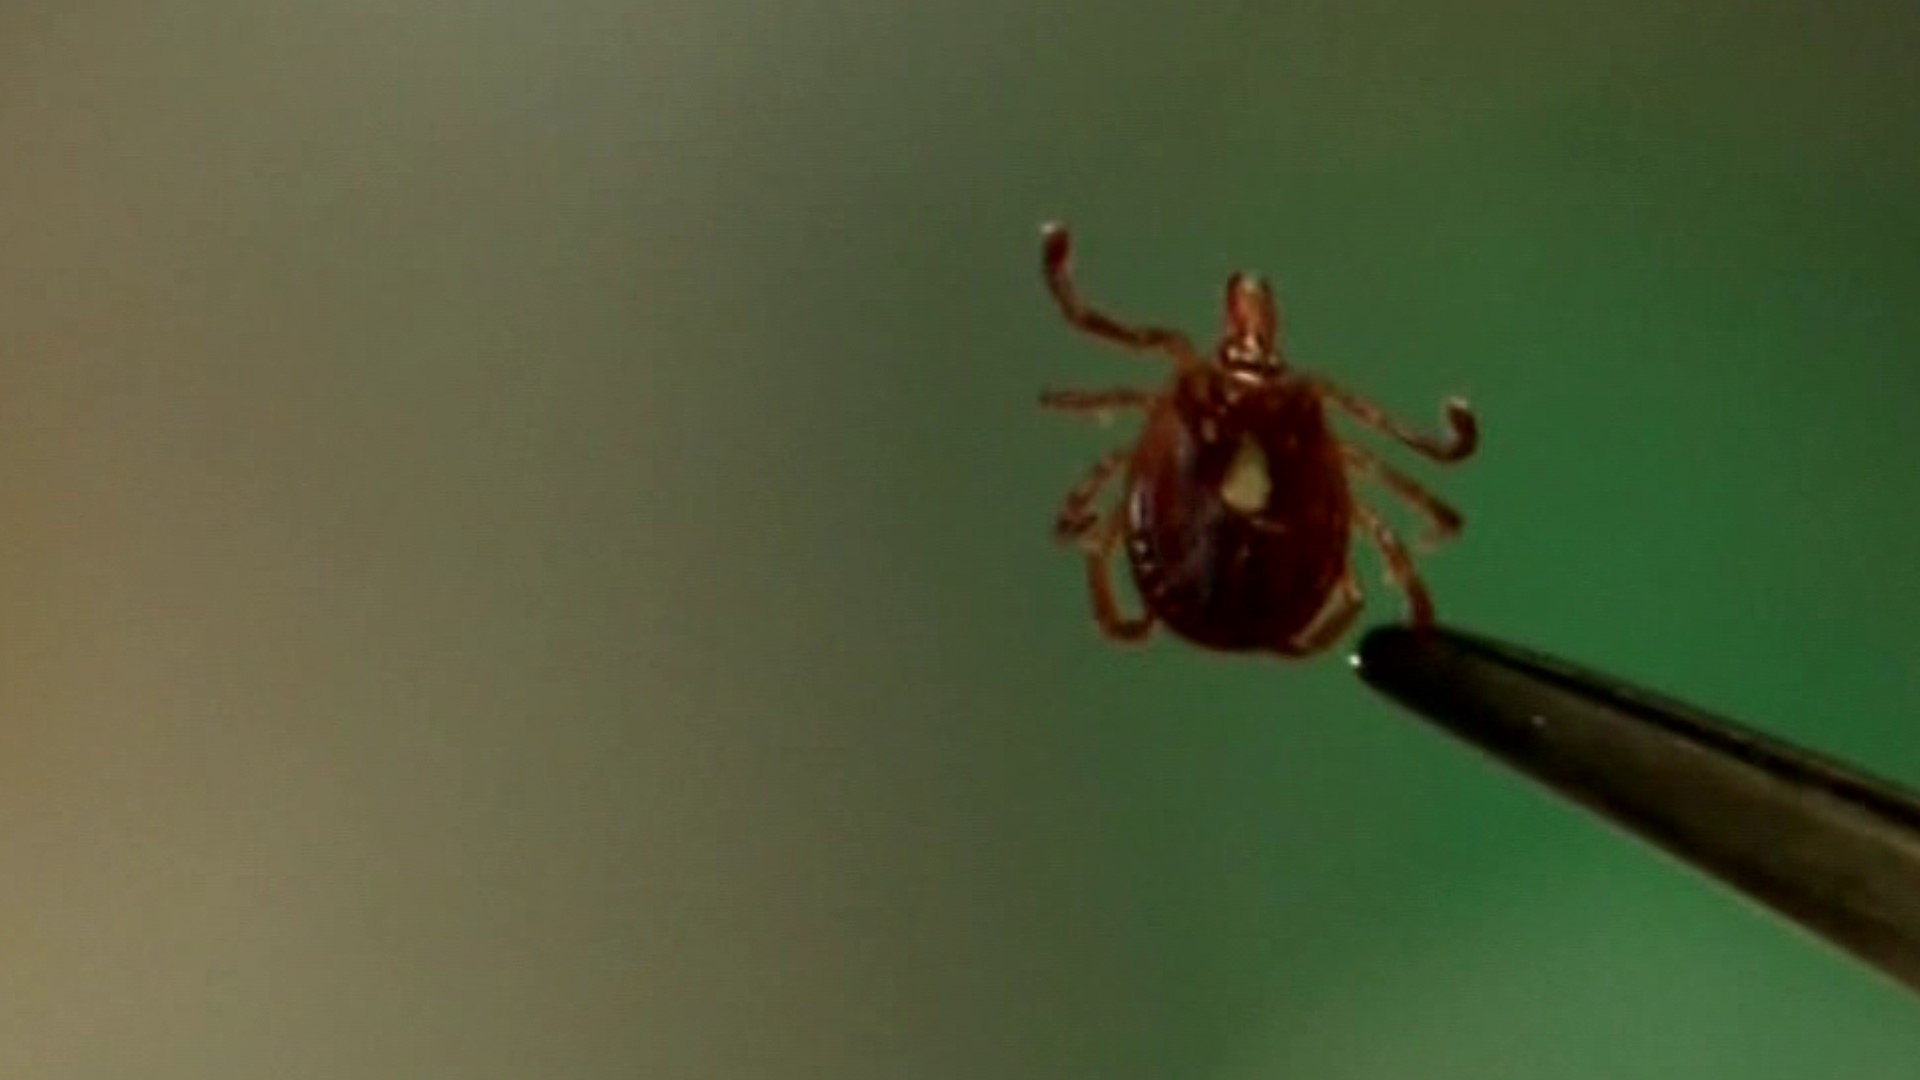 A new tick-borne disease has become a bigger concern after the first fatal case was confirmed.